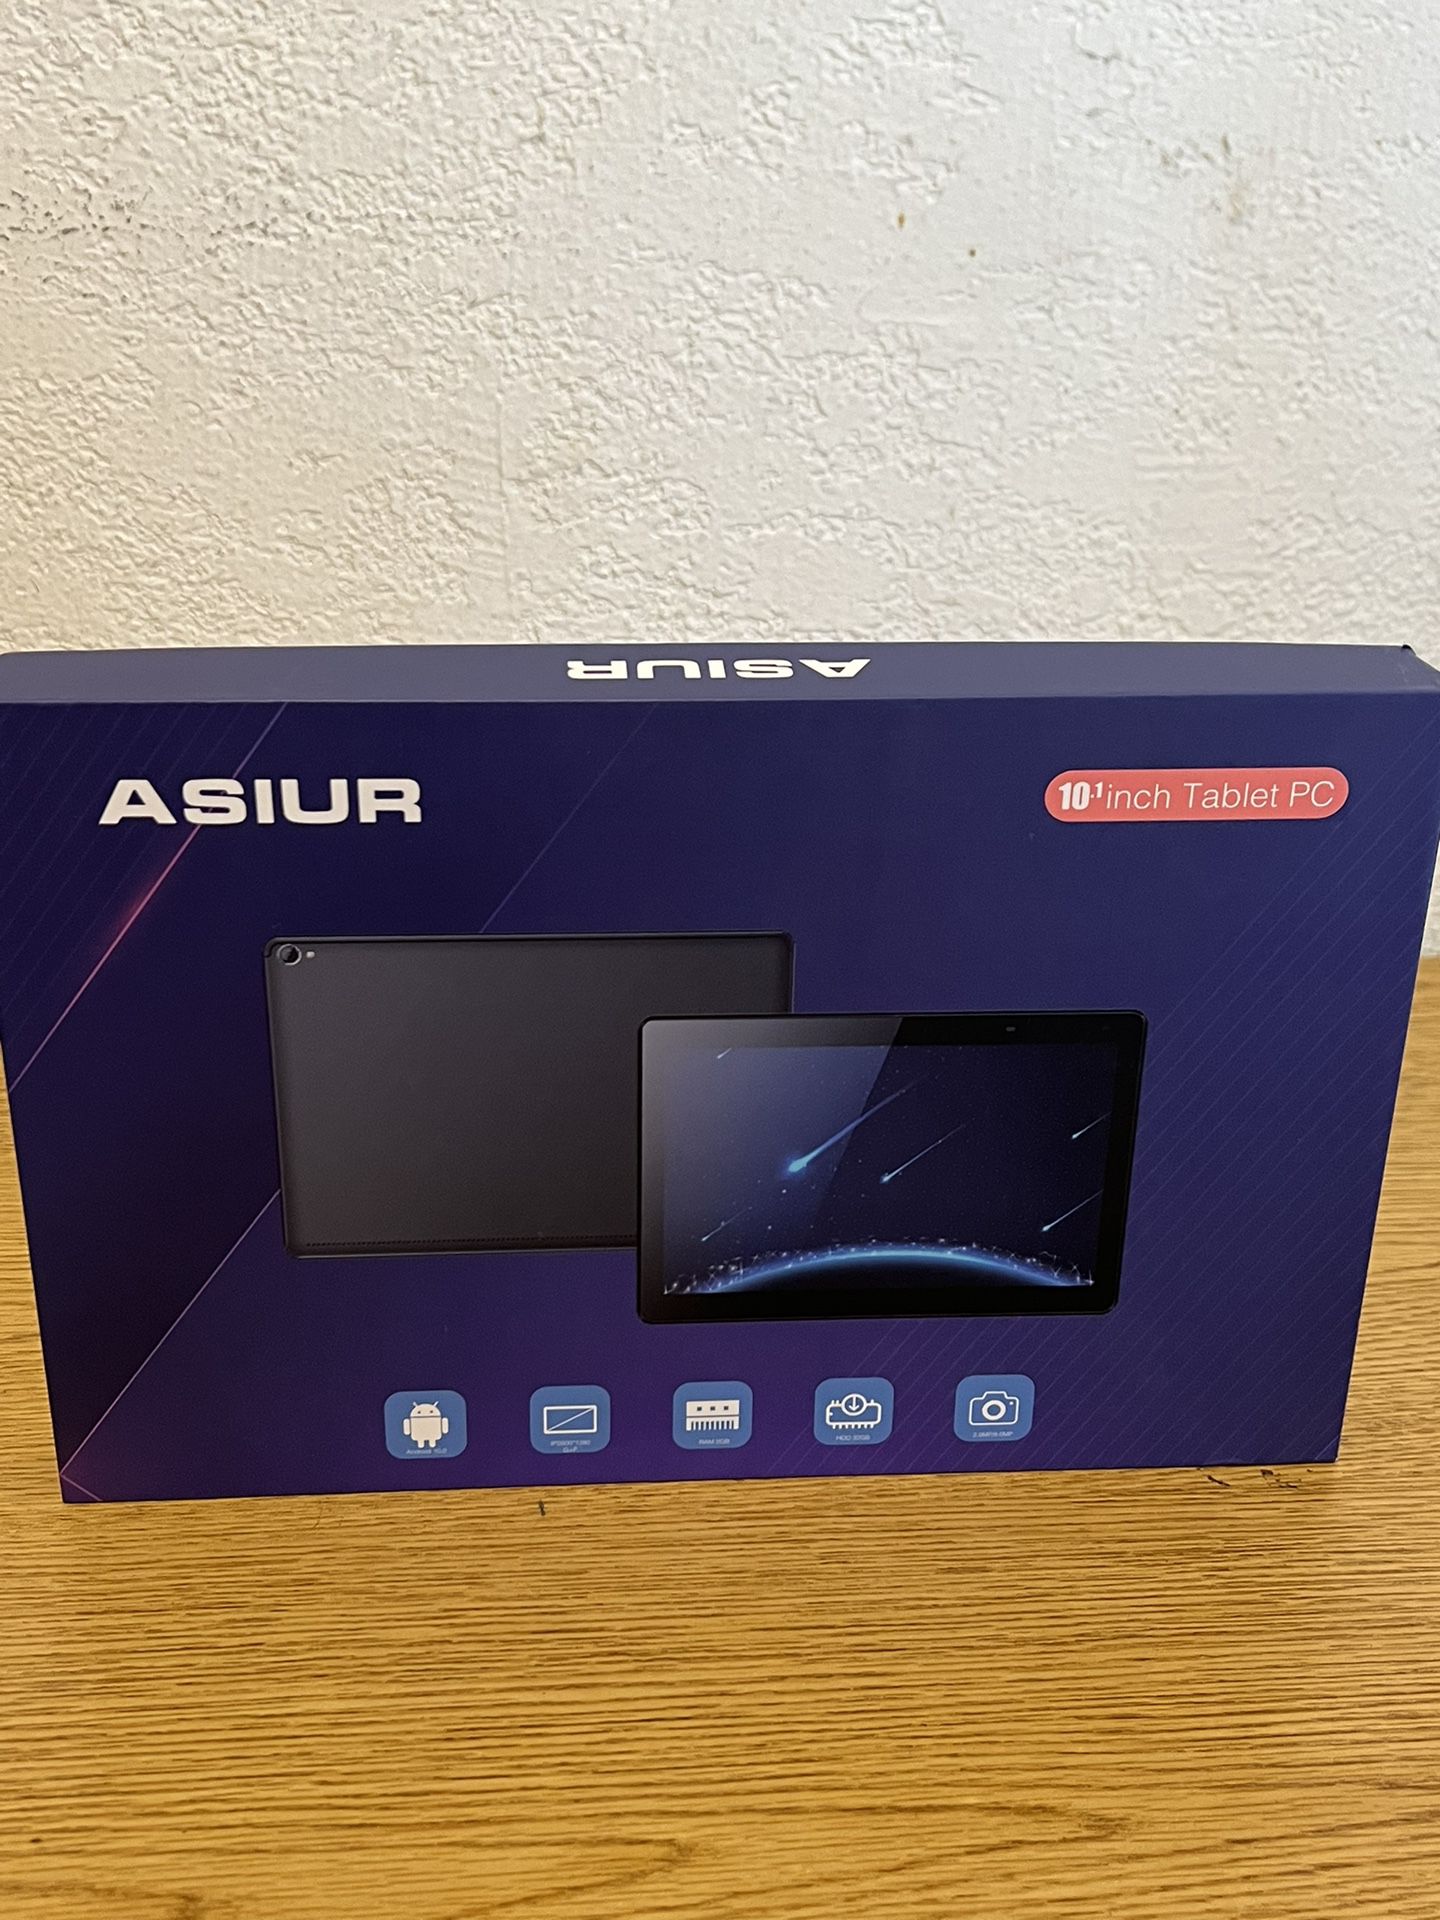 🔥😲Best Cheap Tablet🔥😎 $20📱🔥 ASIUR Android Tablet 10 Inch📱